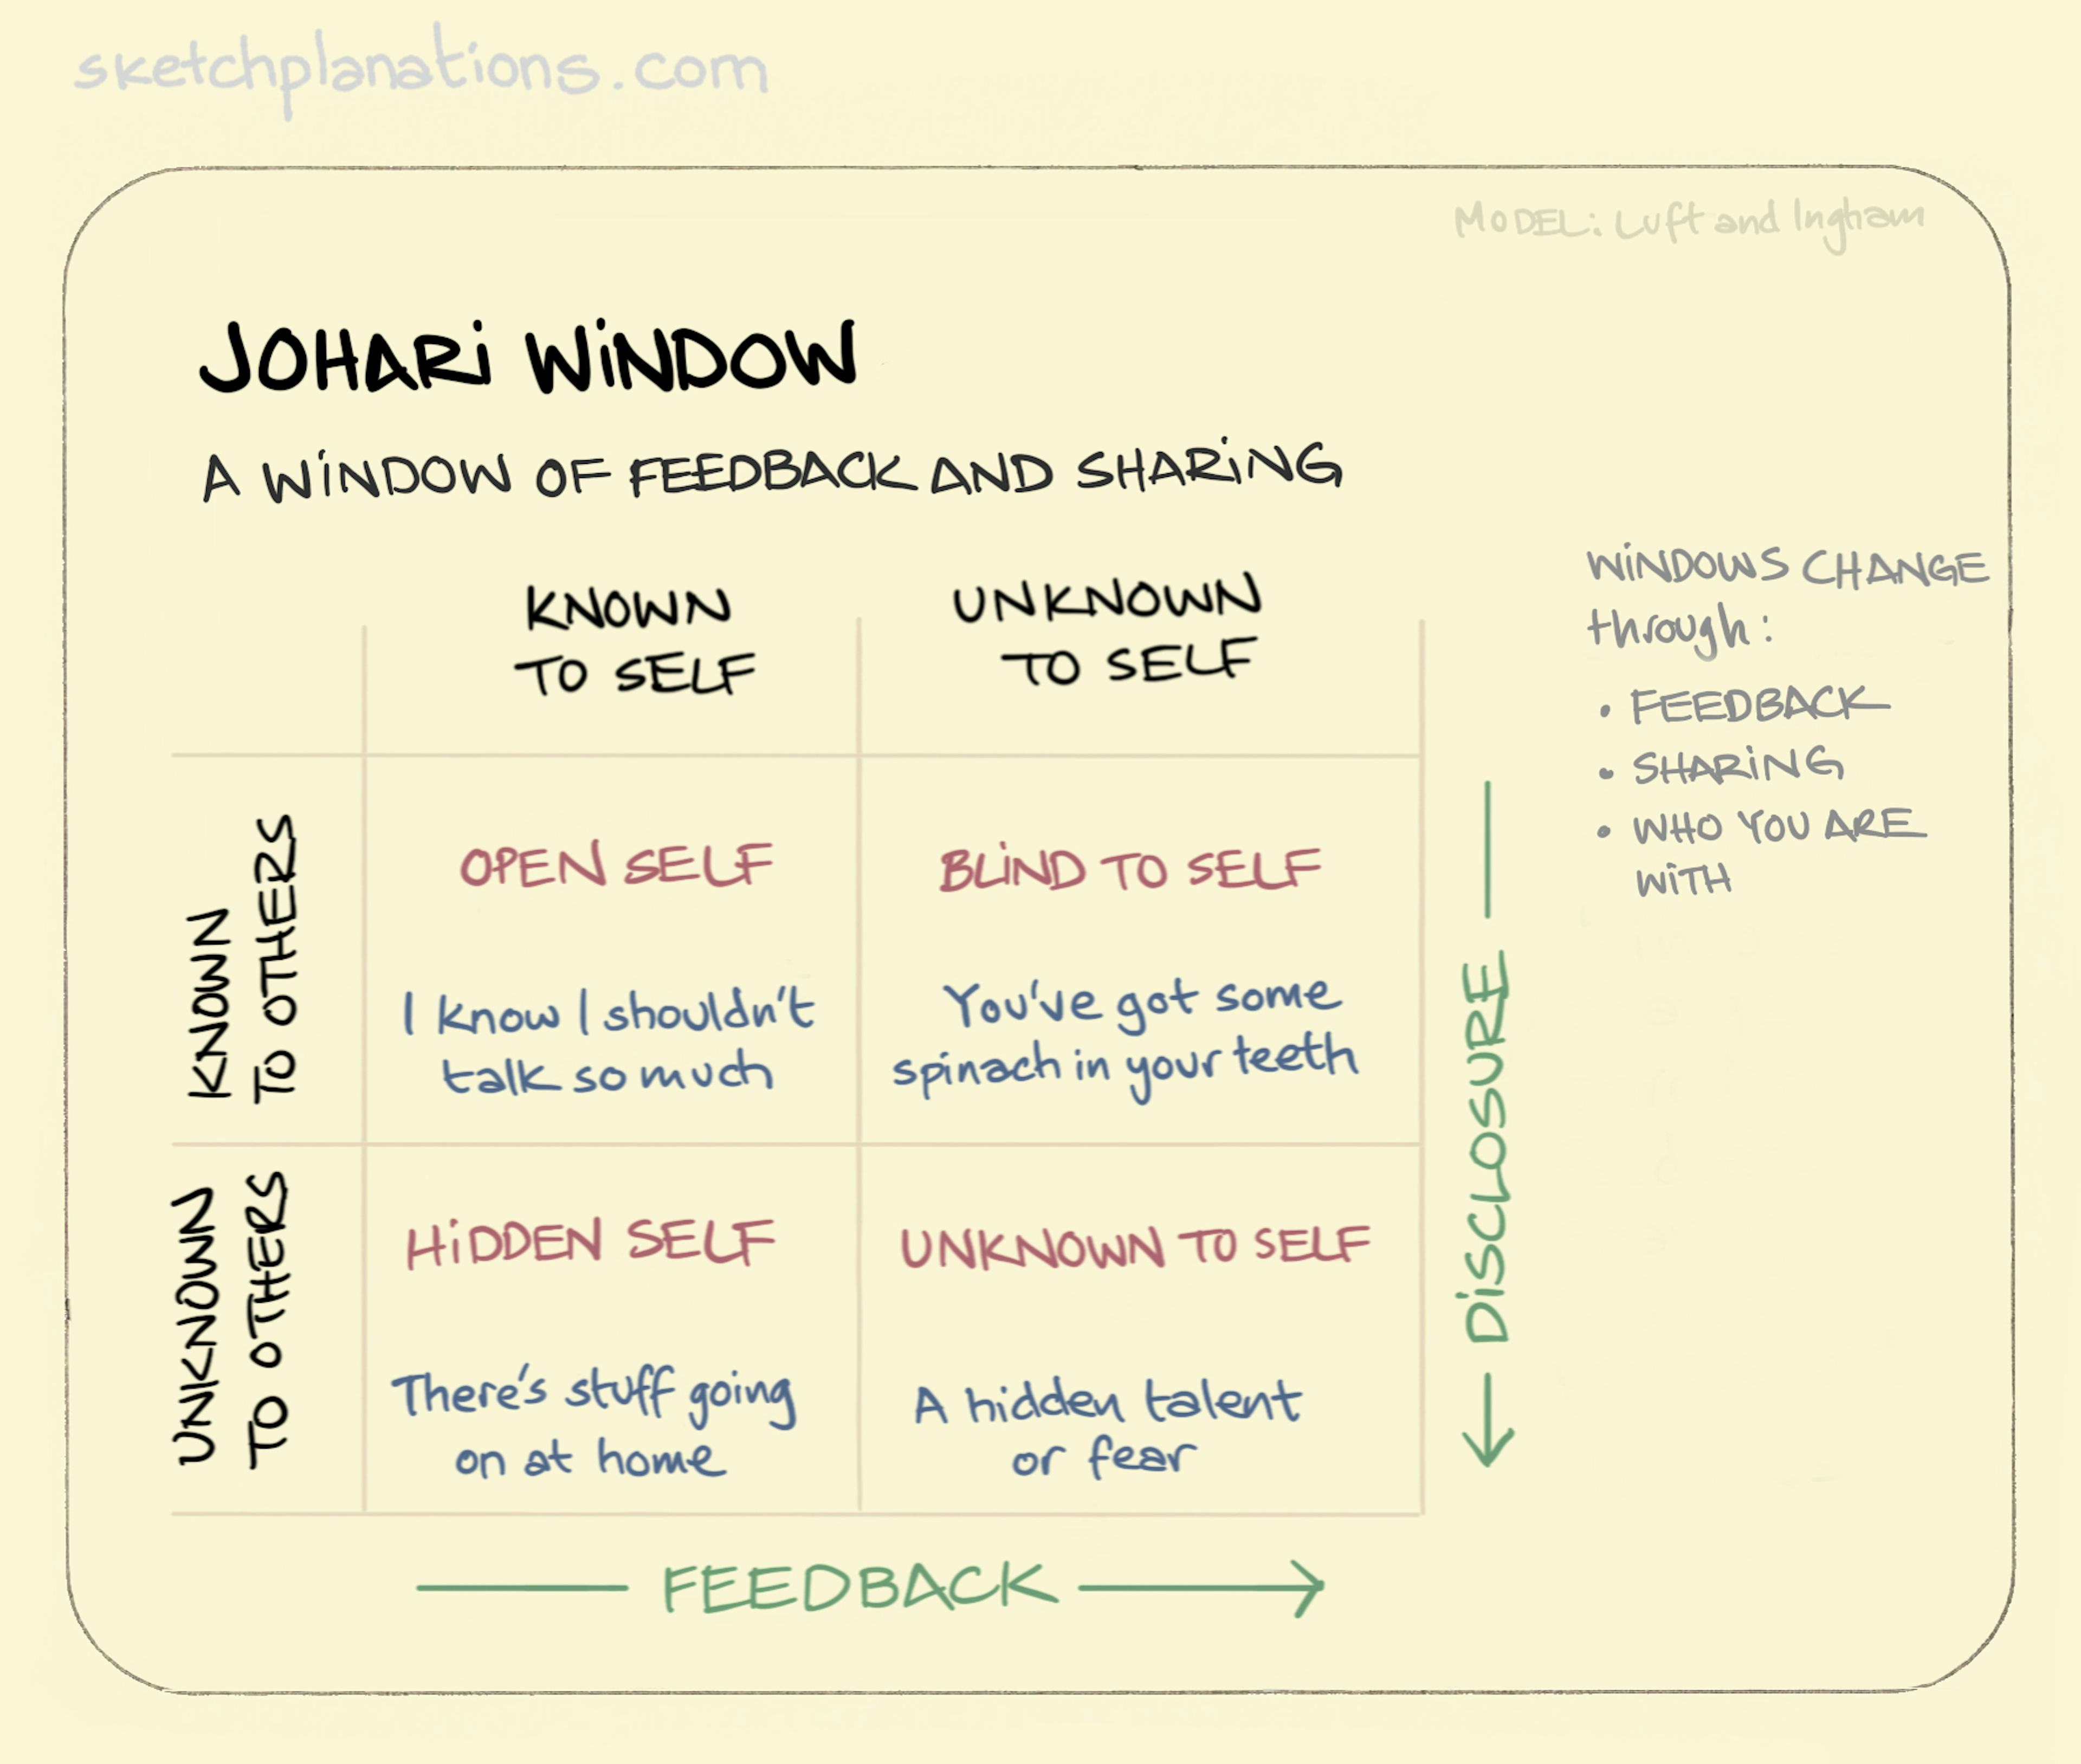 Johari window illustration: a 2 x 2 matrix of what's known to others plotted again what's known to oneself yields four possible scenarios. 